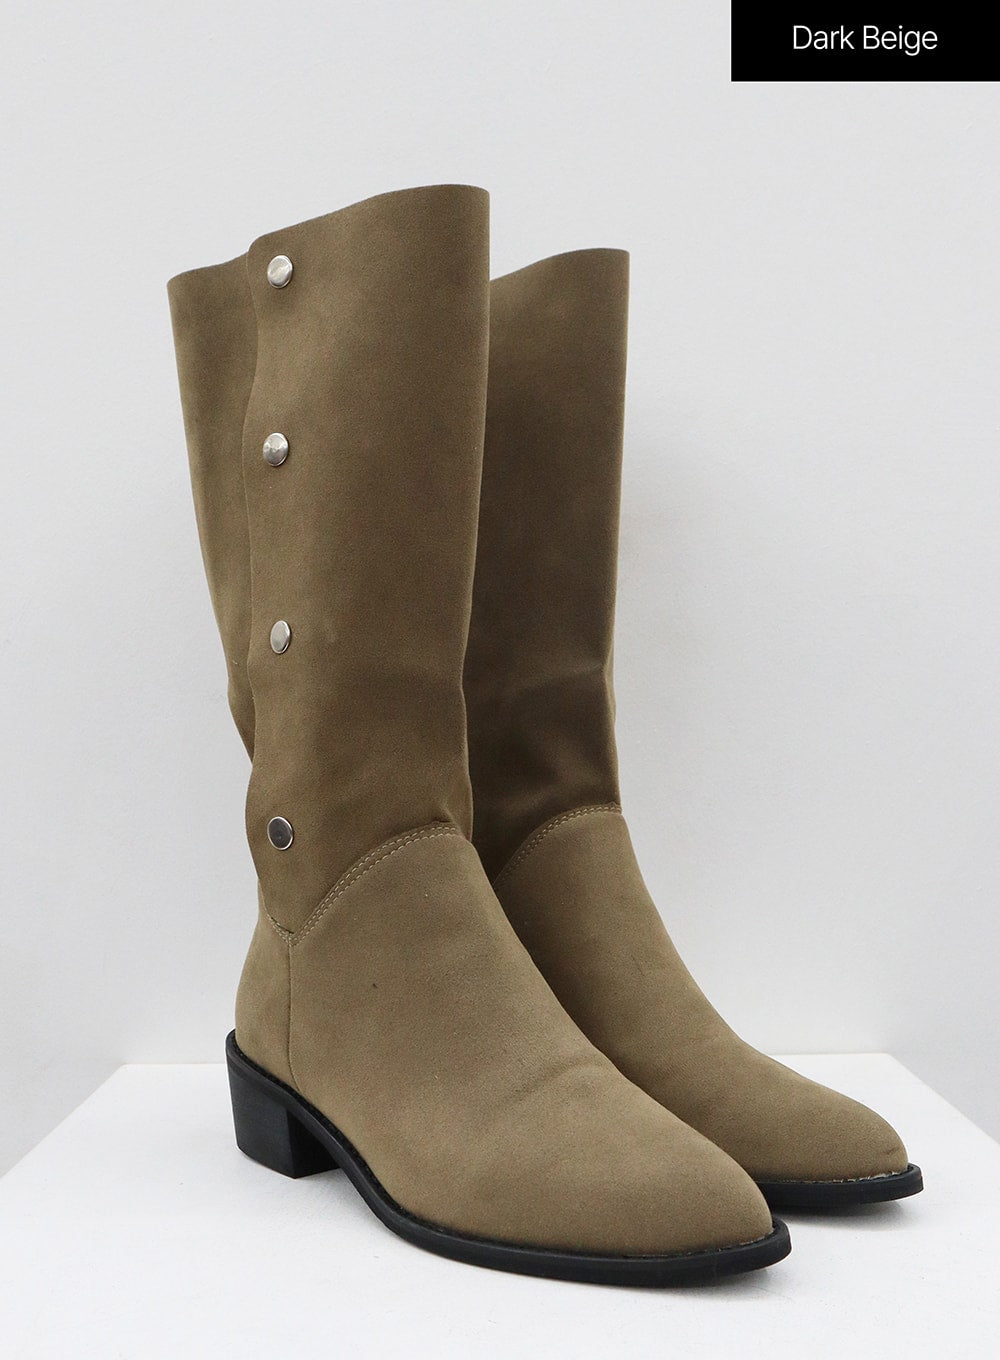 Pointed Toe Button Mid-Calf Boots ON17